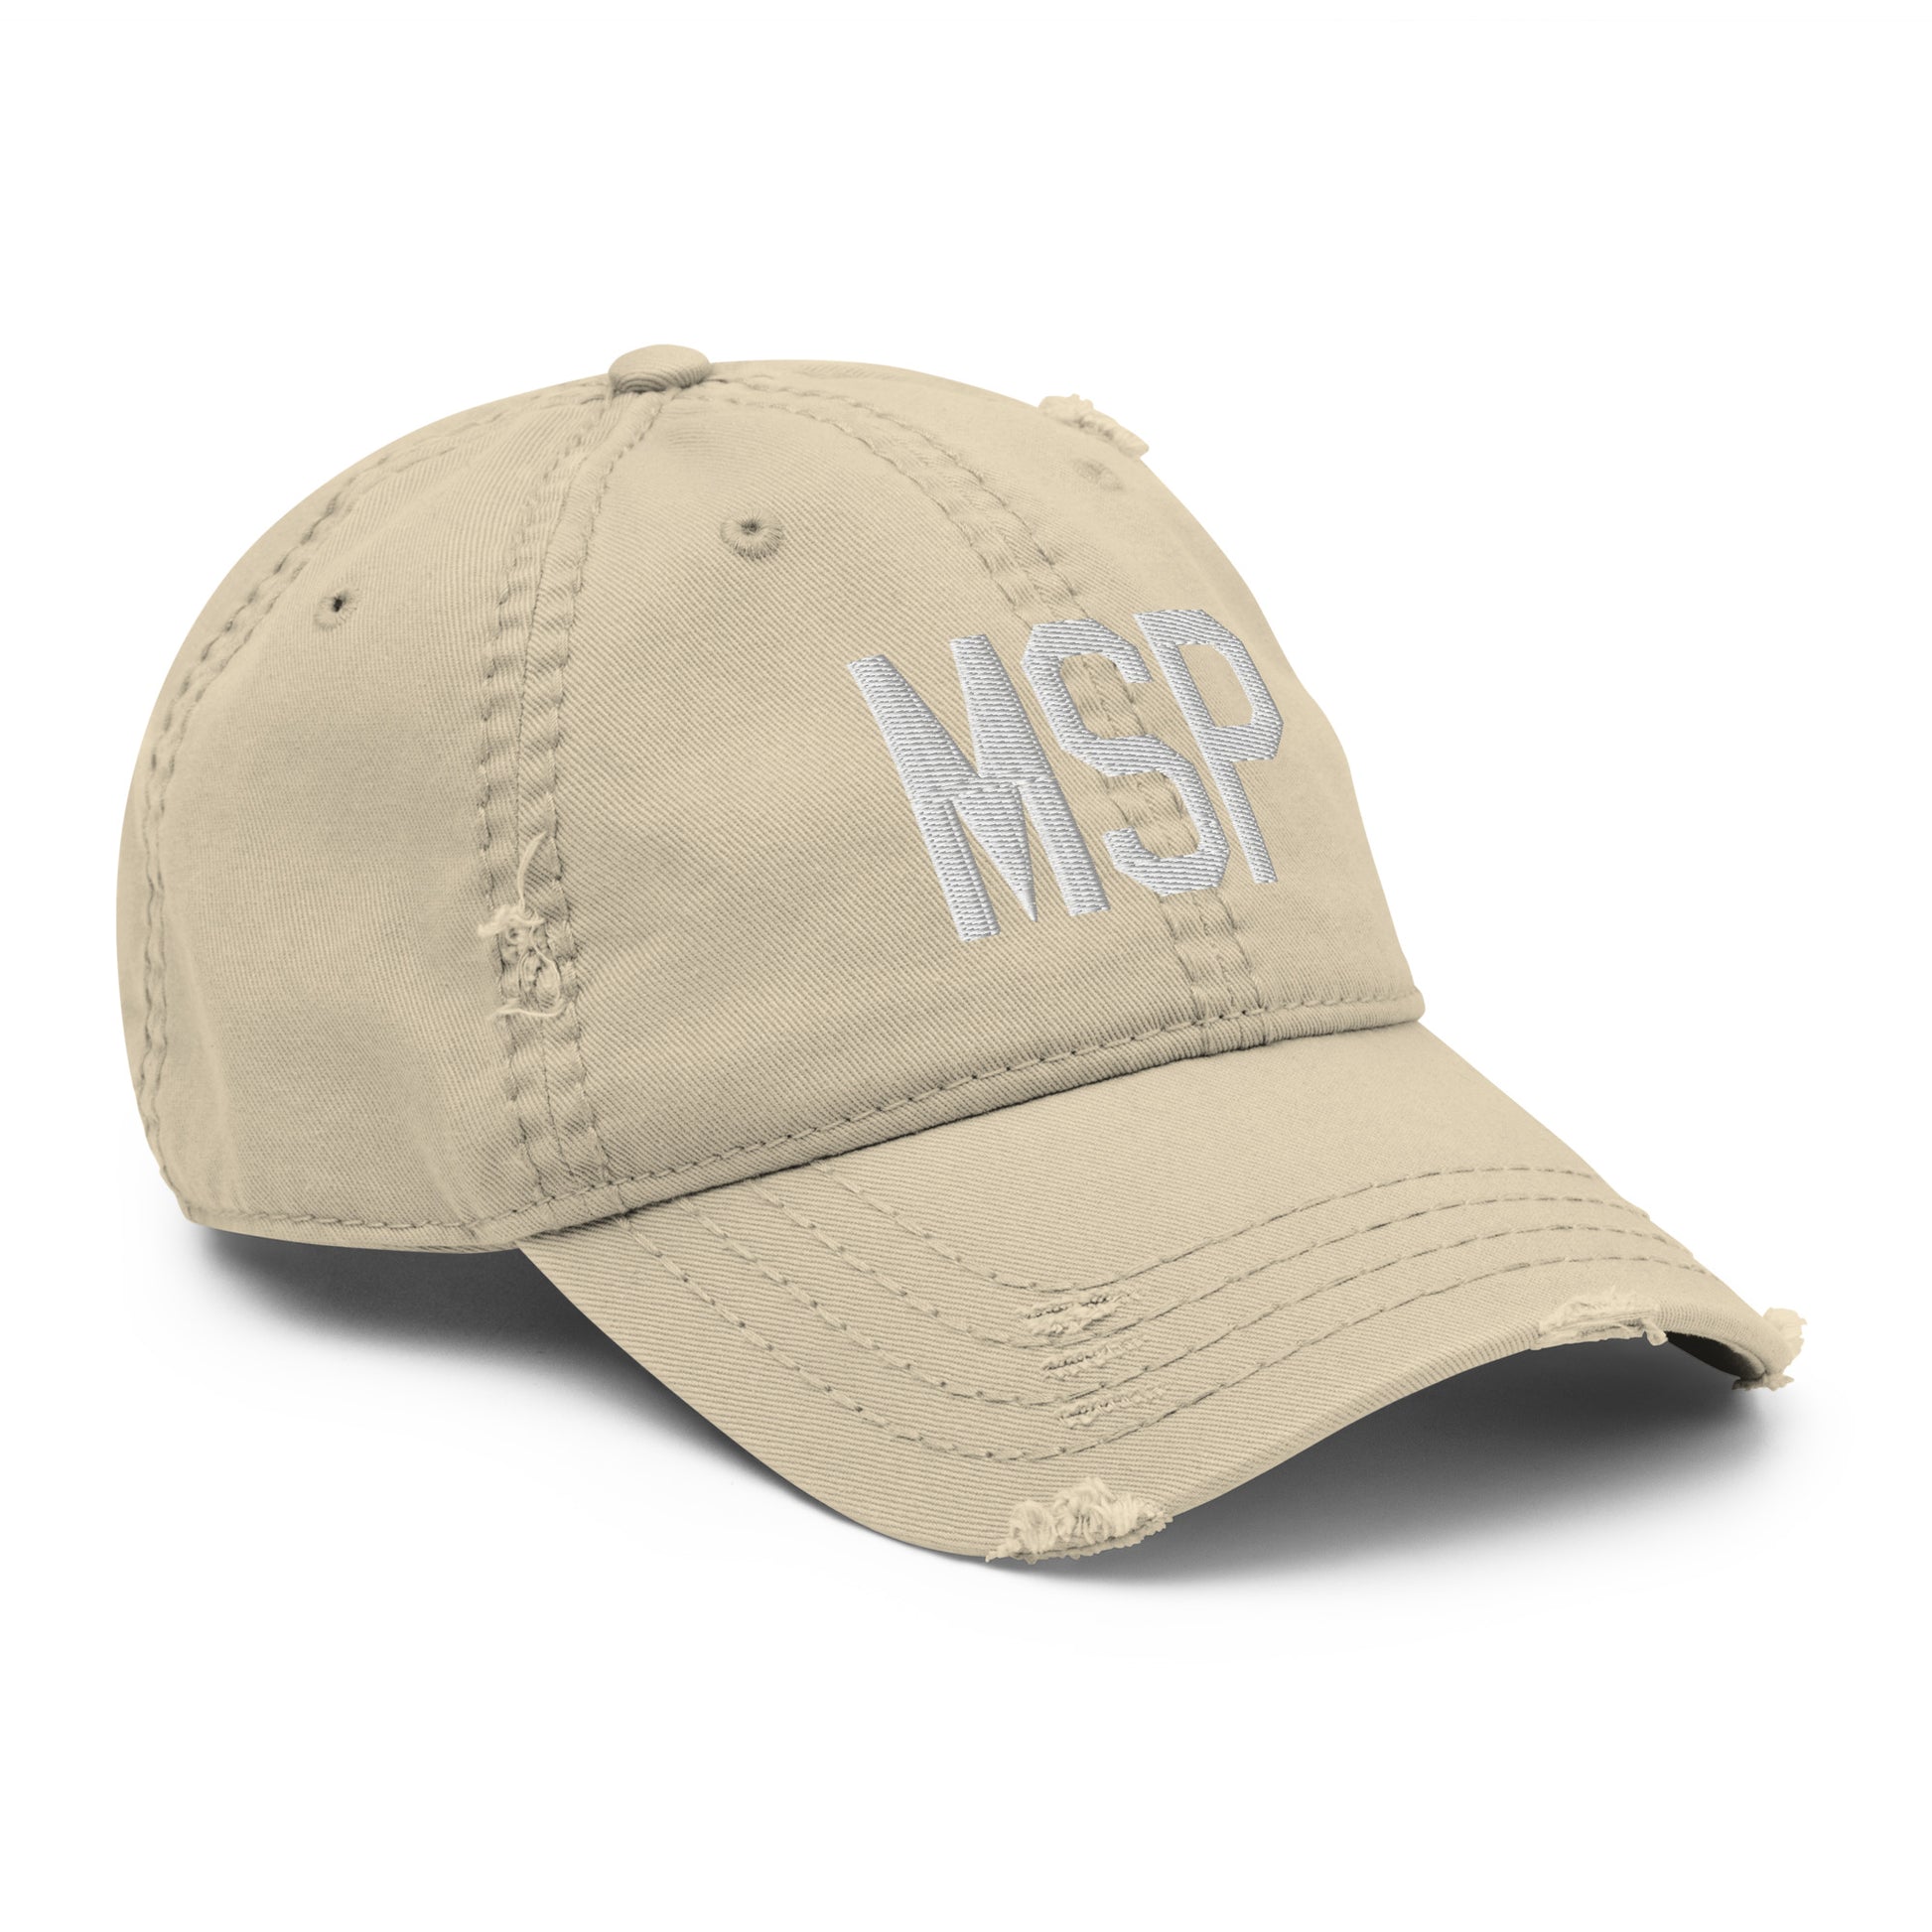 Airport Code Distressed Hat - White • MSP Minneapolis • YHM Designs - Image 20